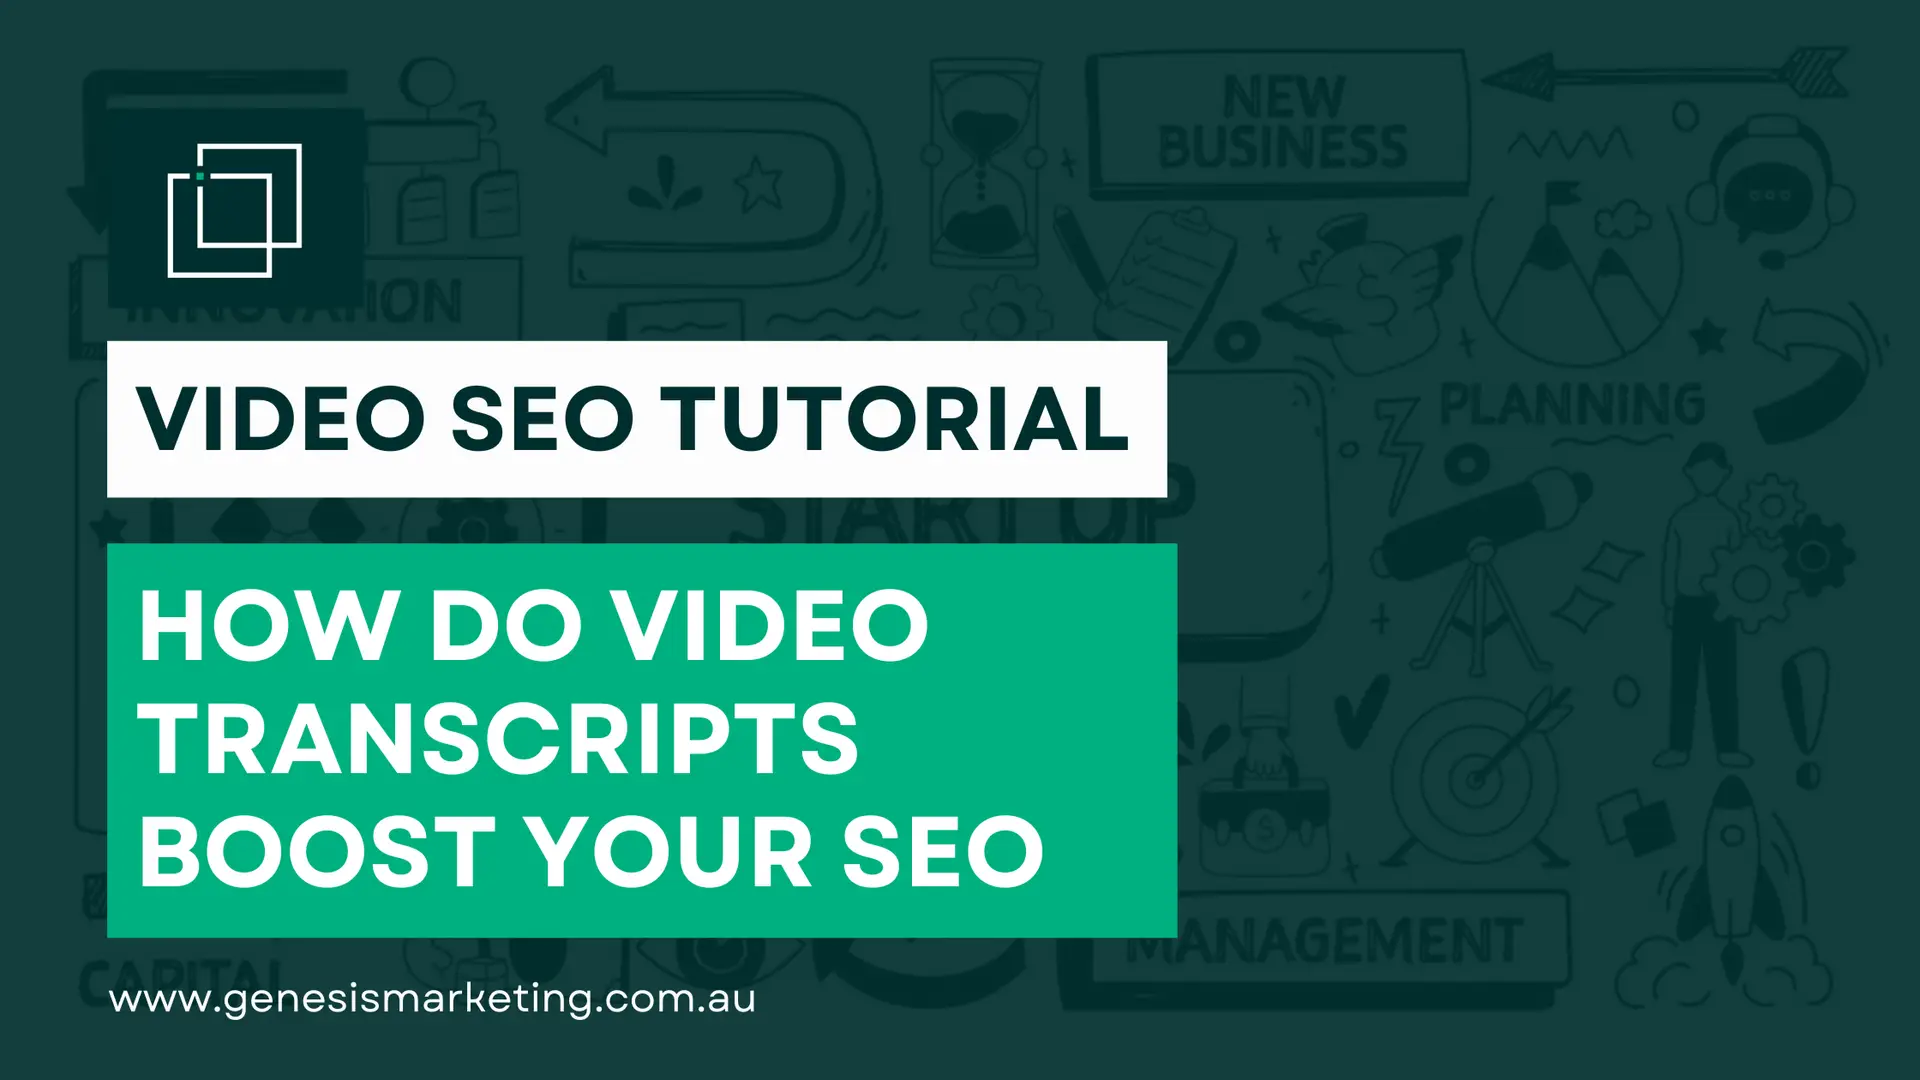 How Do Video Transcripts Boost Your SEO